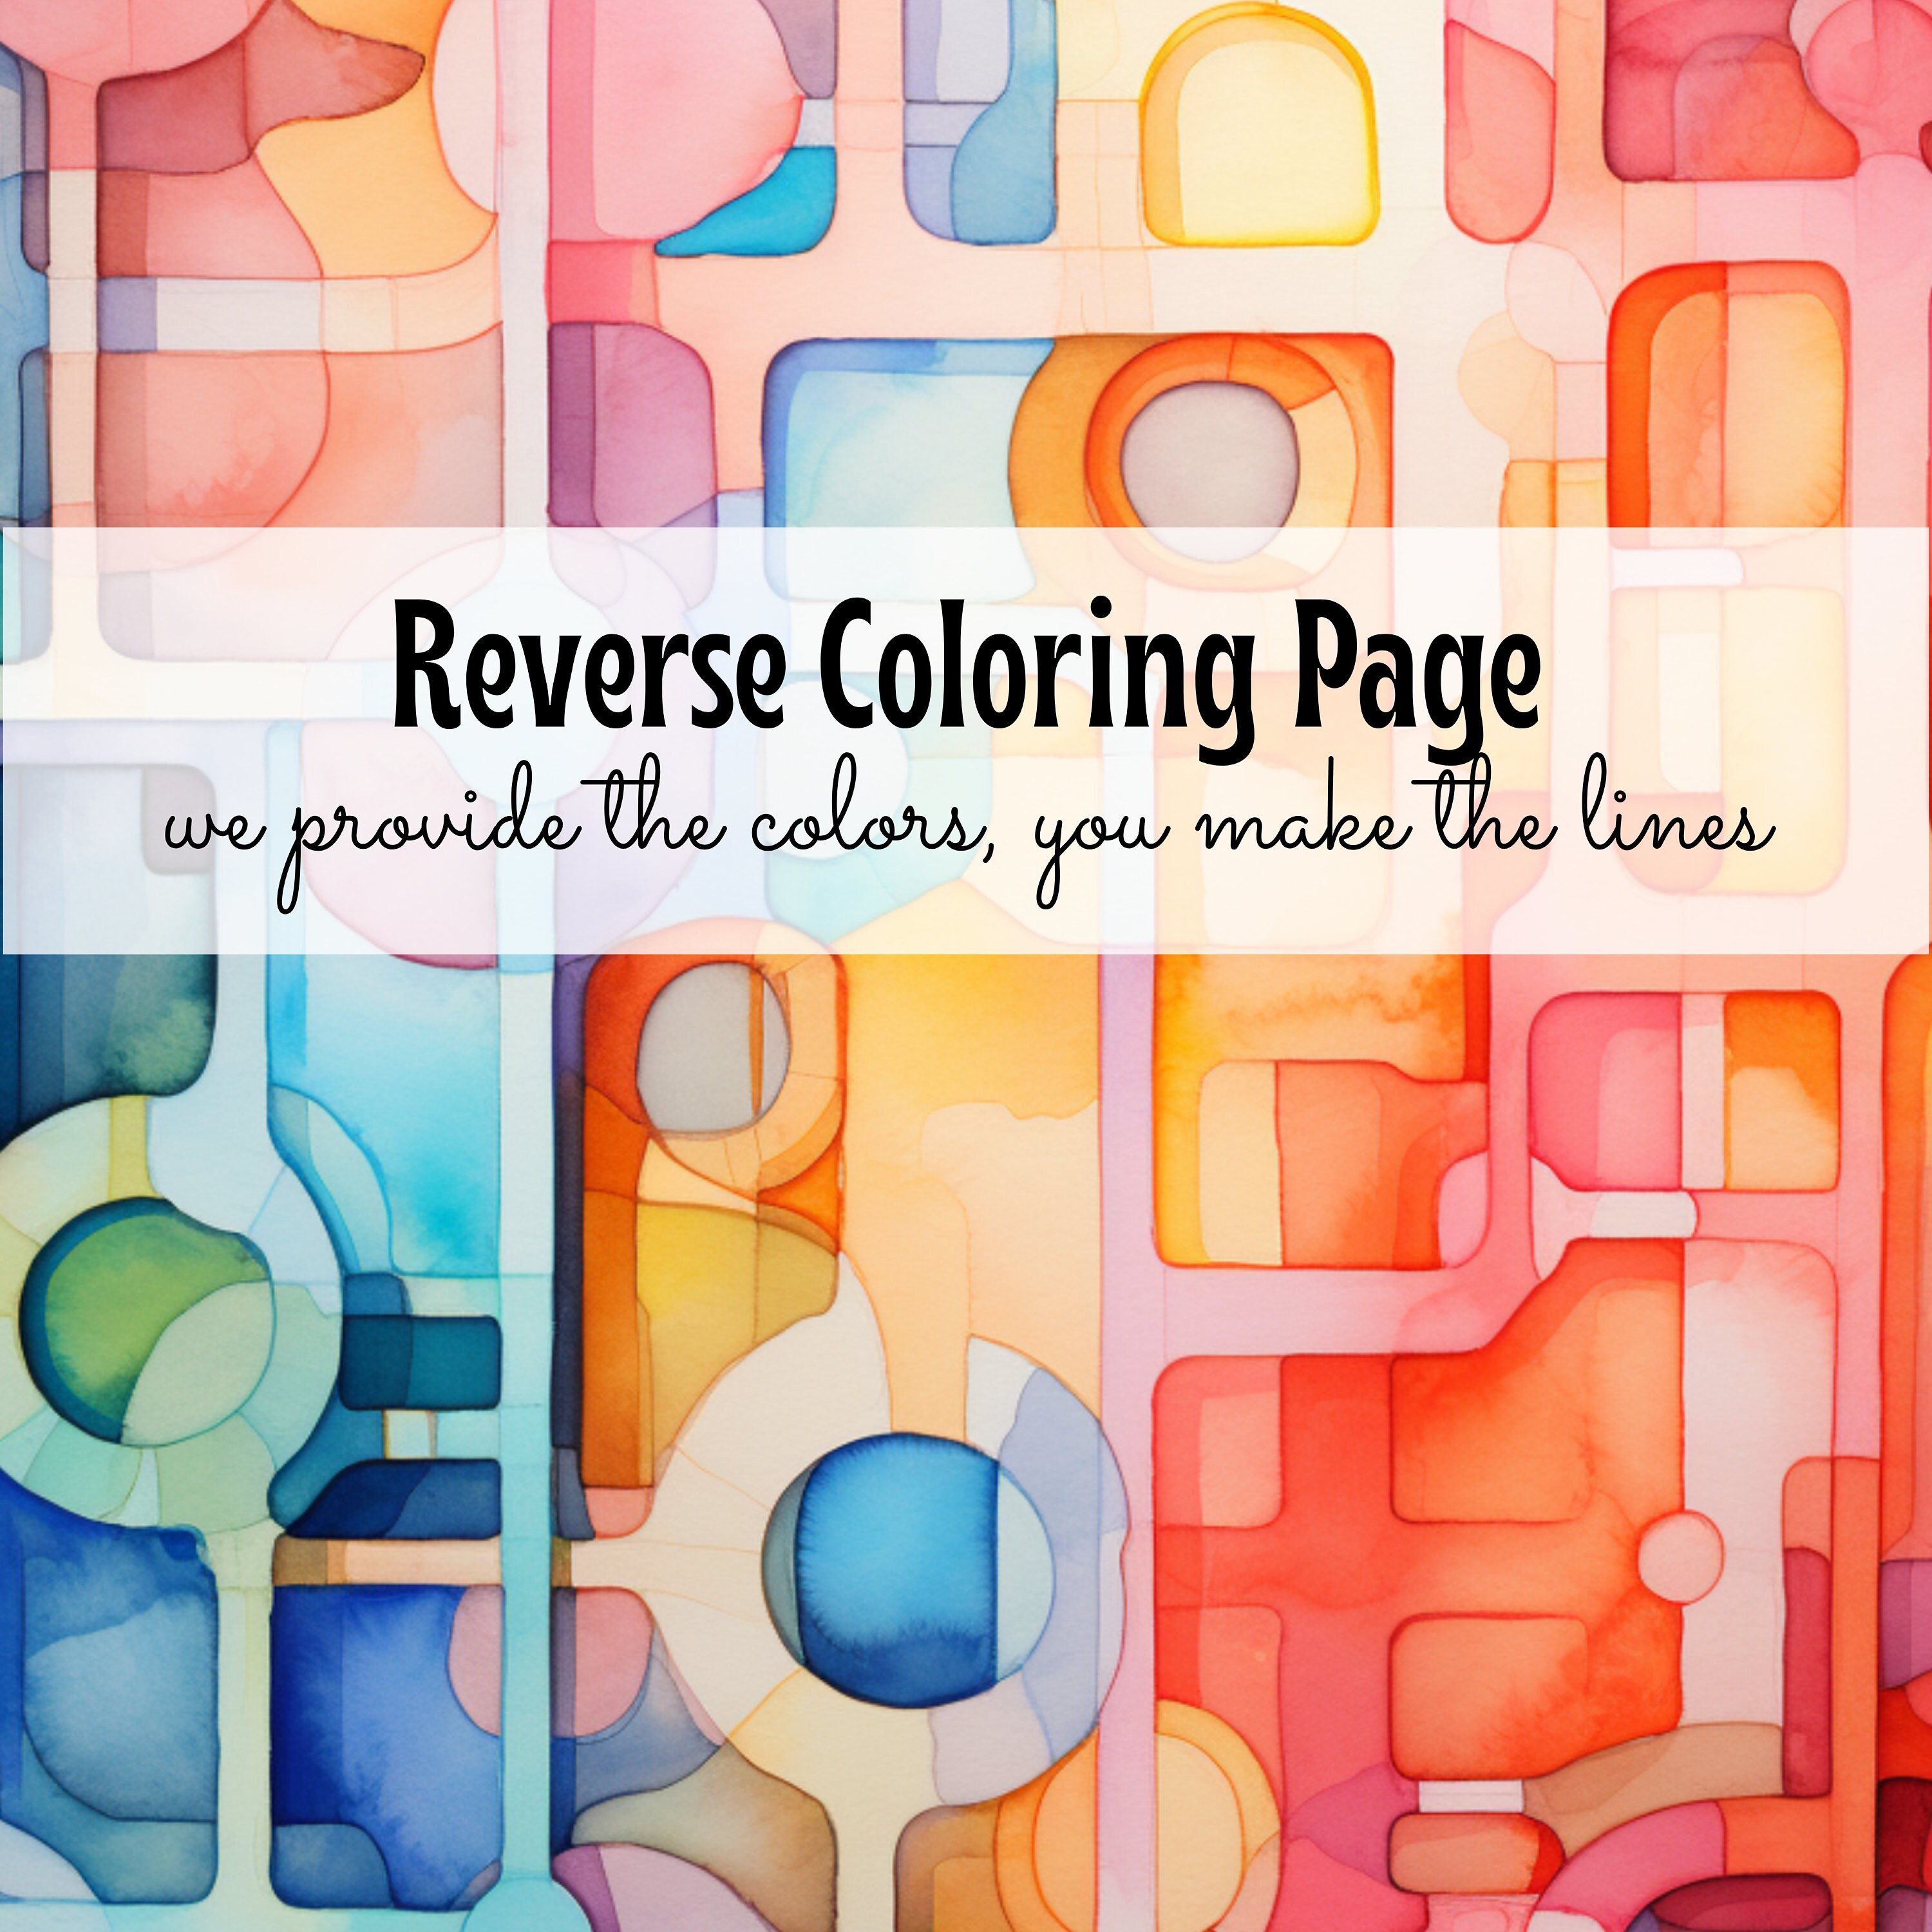 Reverse Coloring Book for Adults Anxiety Relief: Color in Reverse